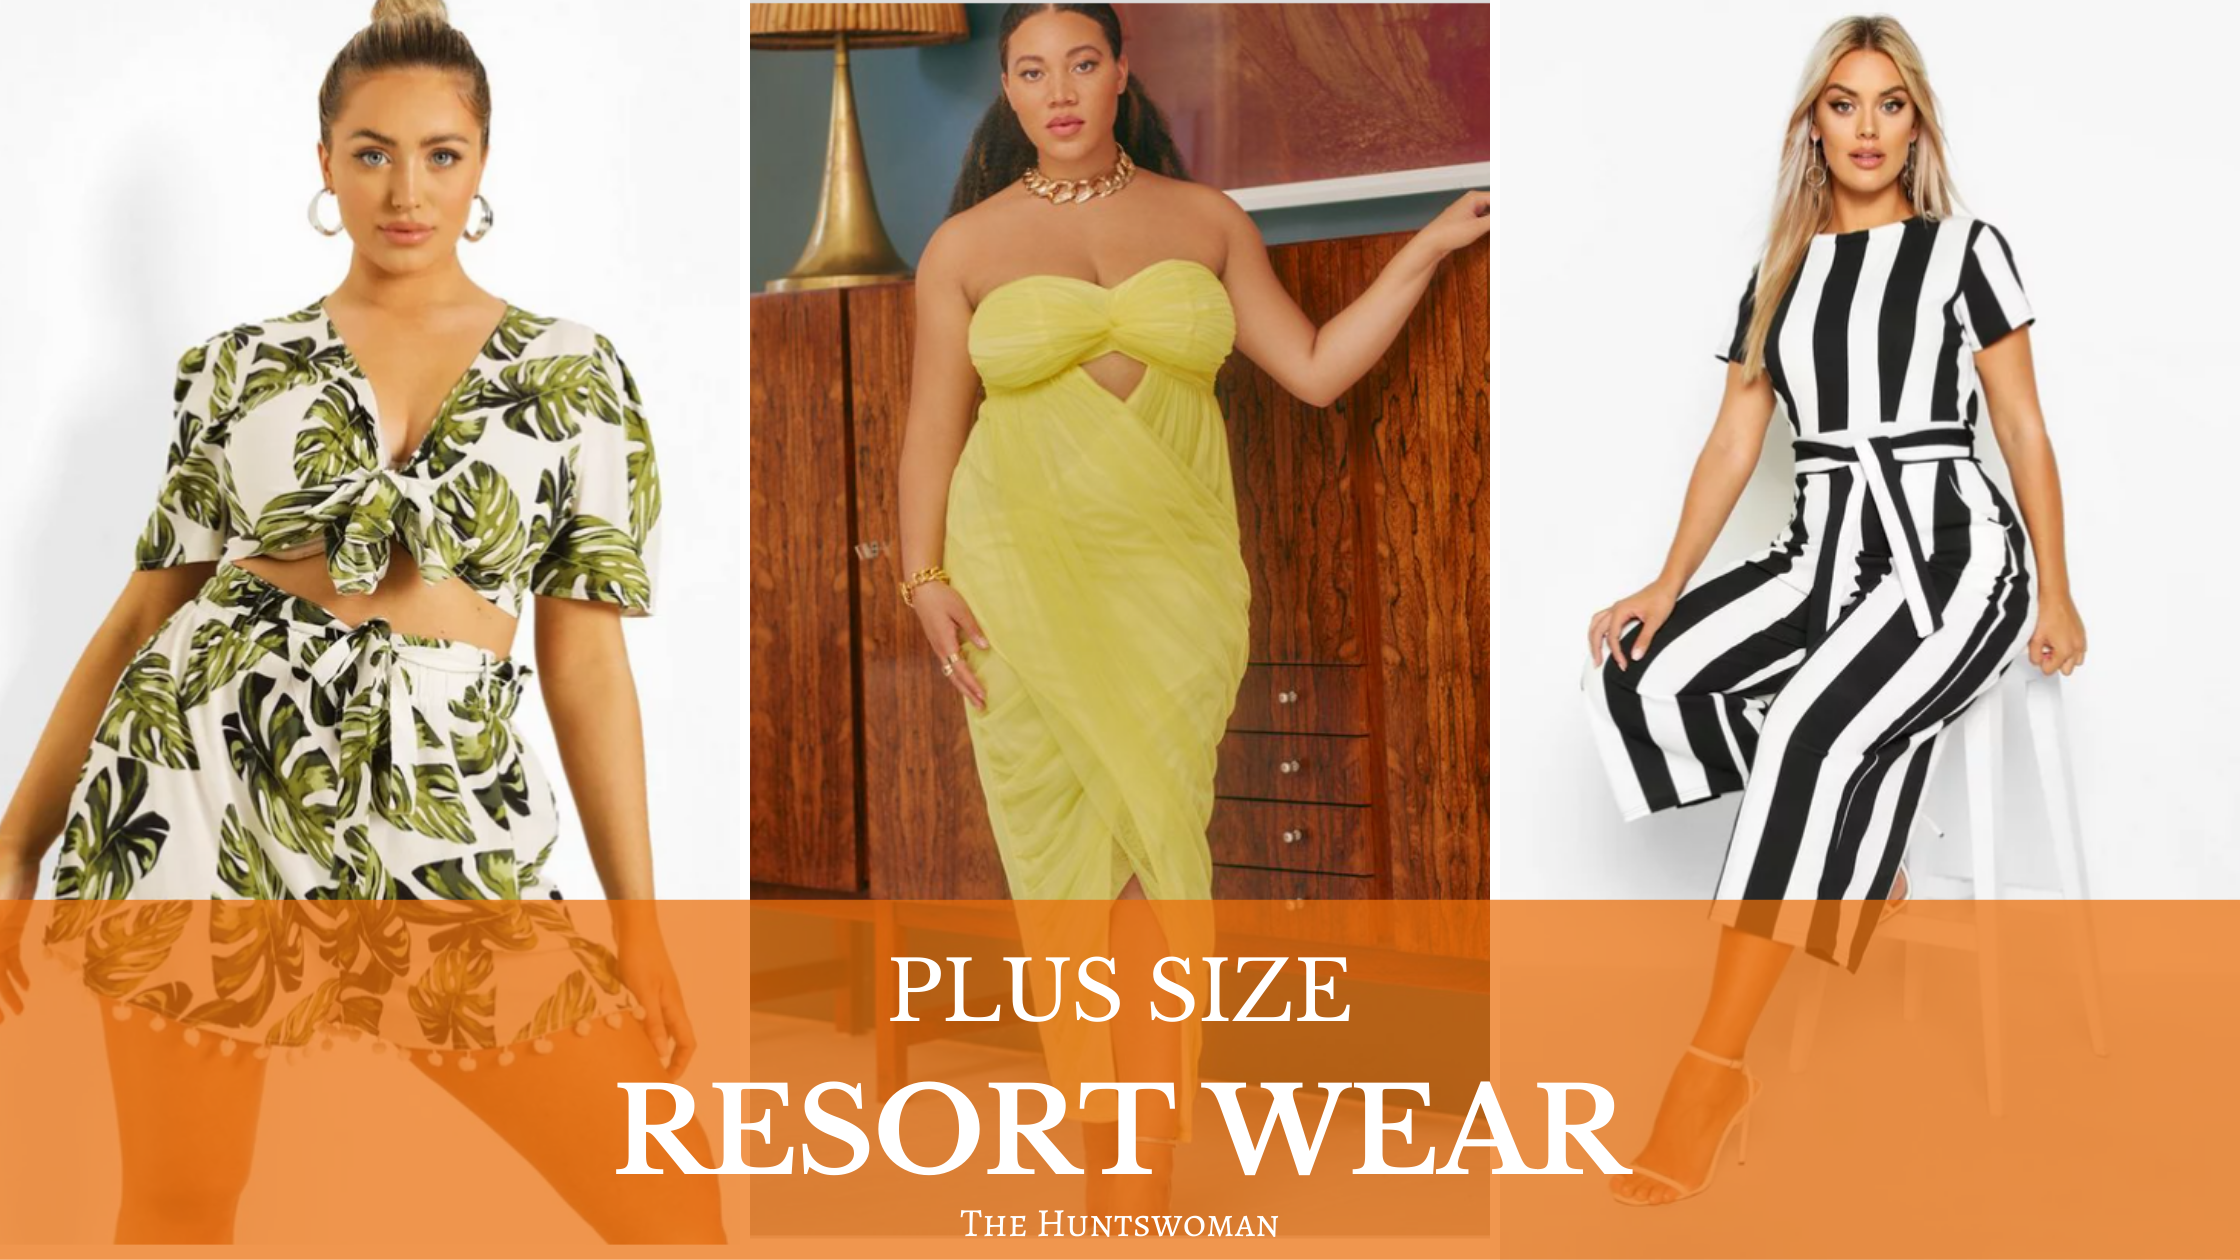 Where to Shop for Plus Size Resort Wear